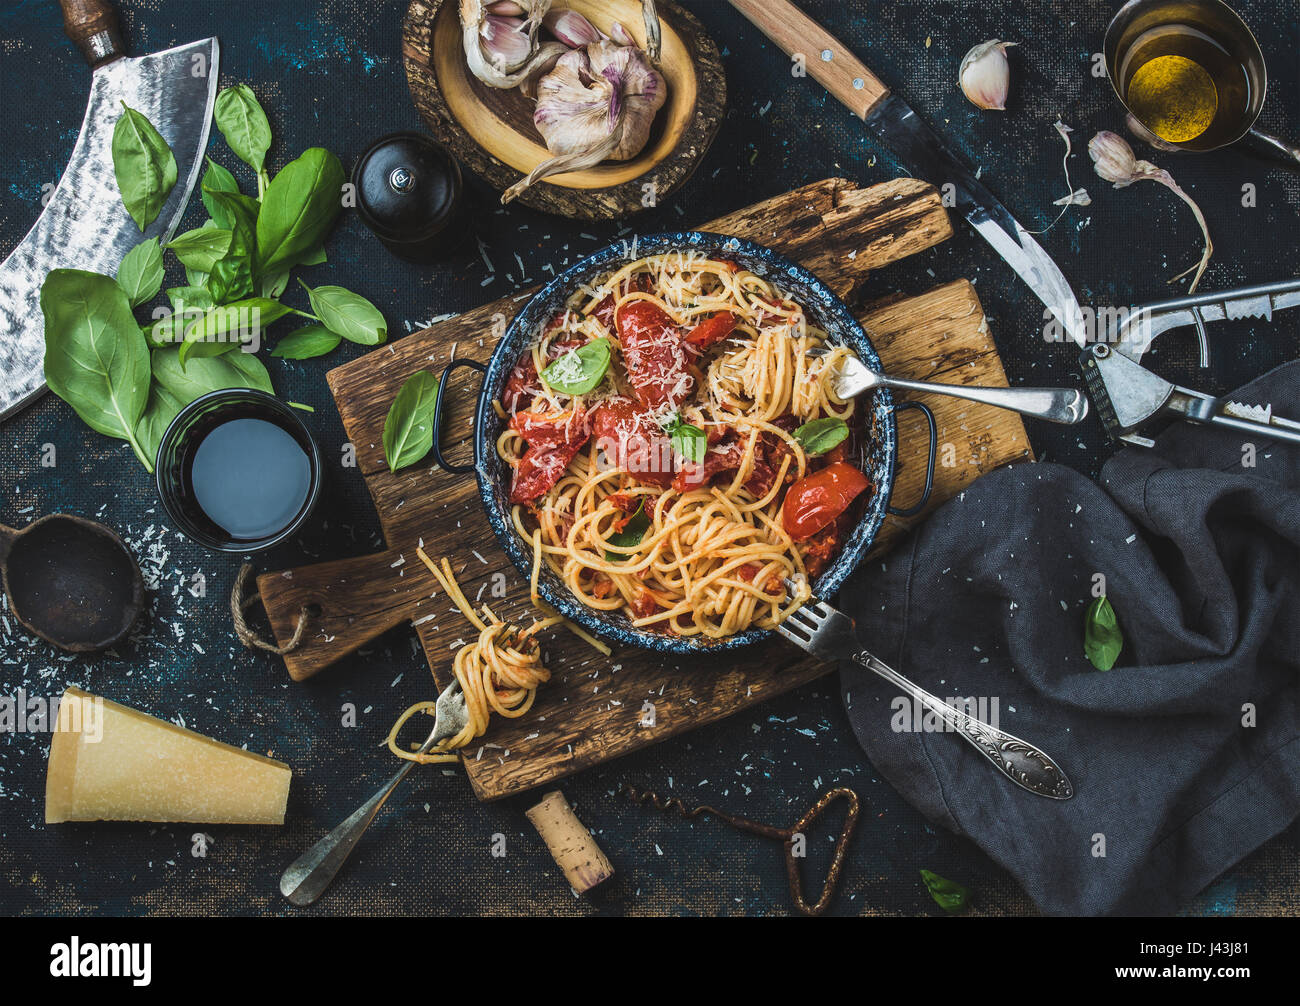 Spaghetti with tomato and basil and ingredients for making pasta Stock Photo